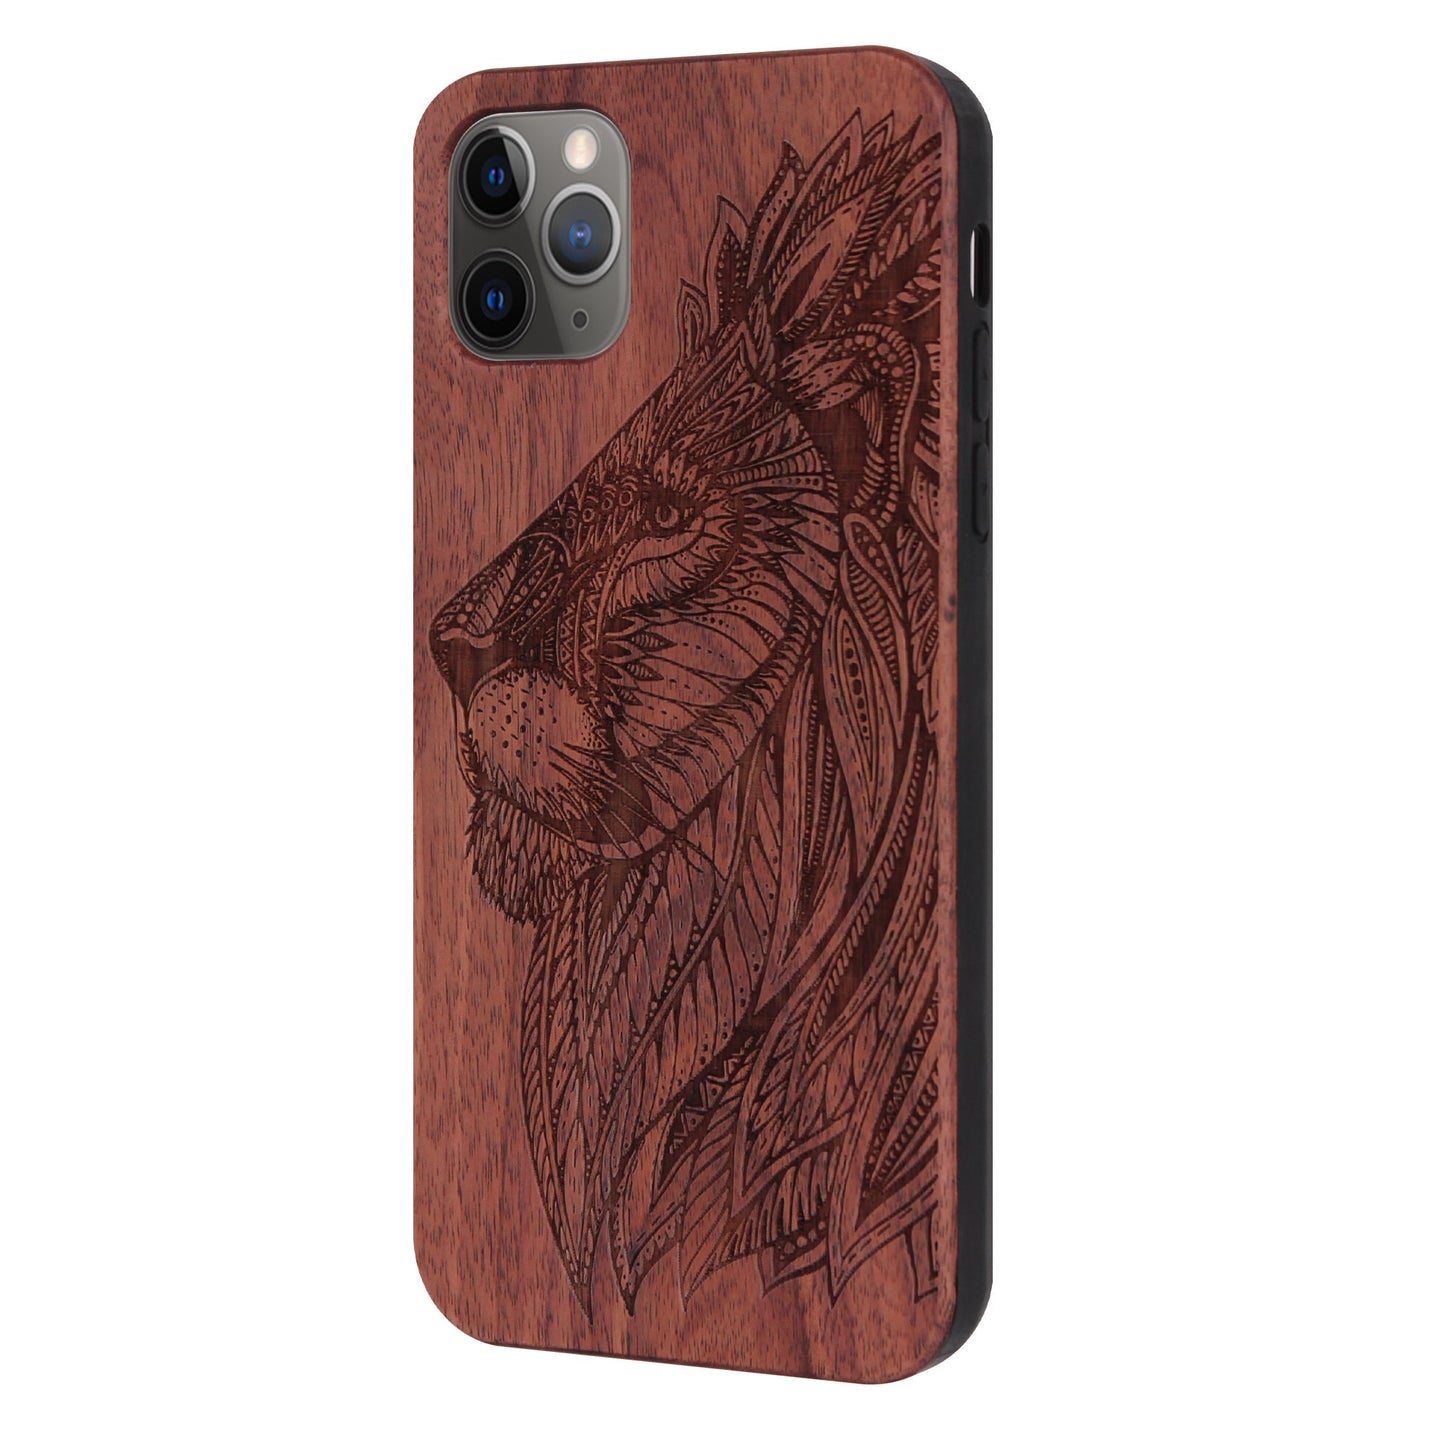 Rosewood Lion Eden Case for iPhone 11 Pro Max